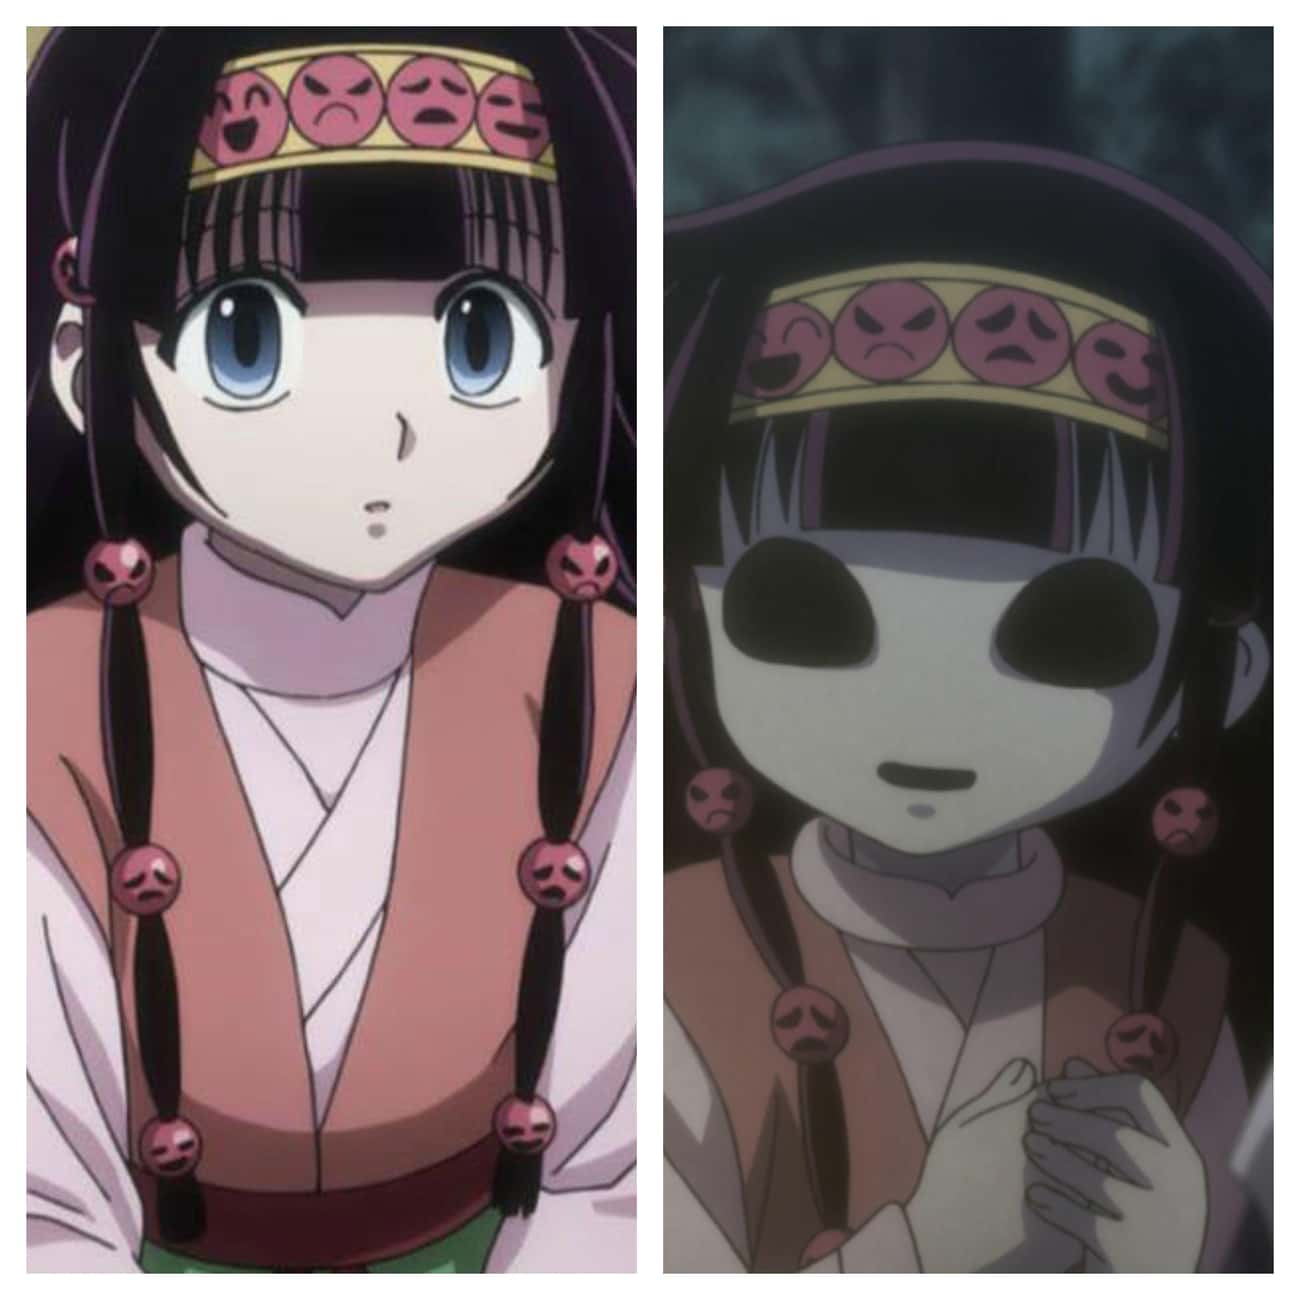 Alluka Zoldyck Is Possessed By A Powerful Spirit In 'Hunter X Hunter'